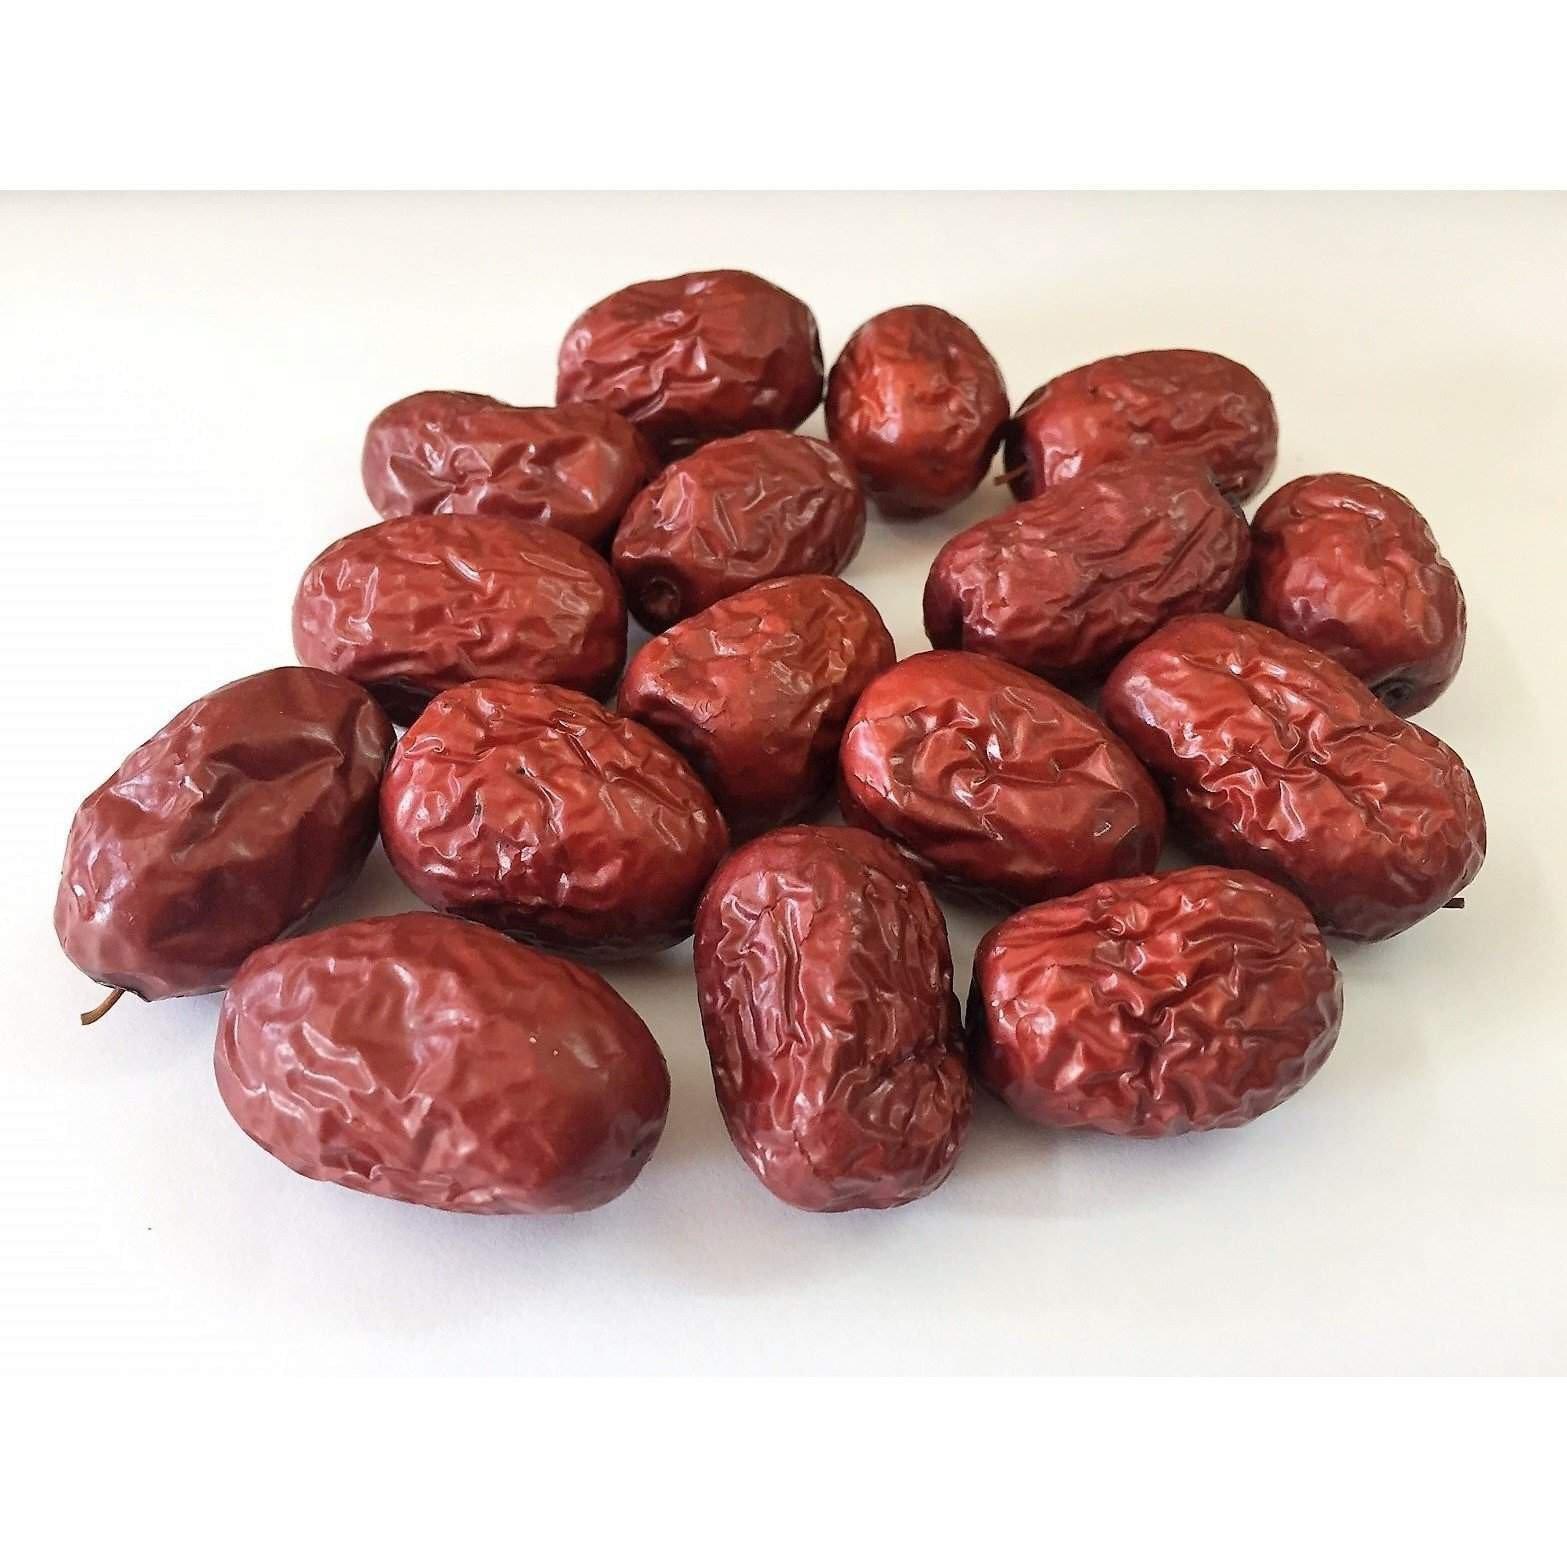 HerbsGreen Hand Selected Jujube Chinese Red Dates, Large Size - Buy at New Green Nutrition